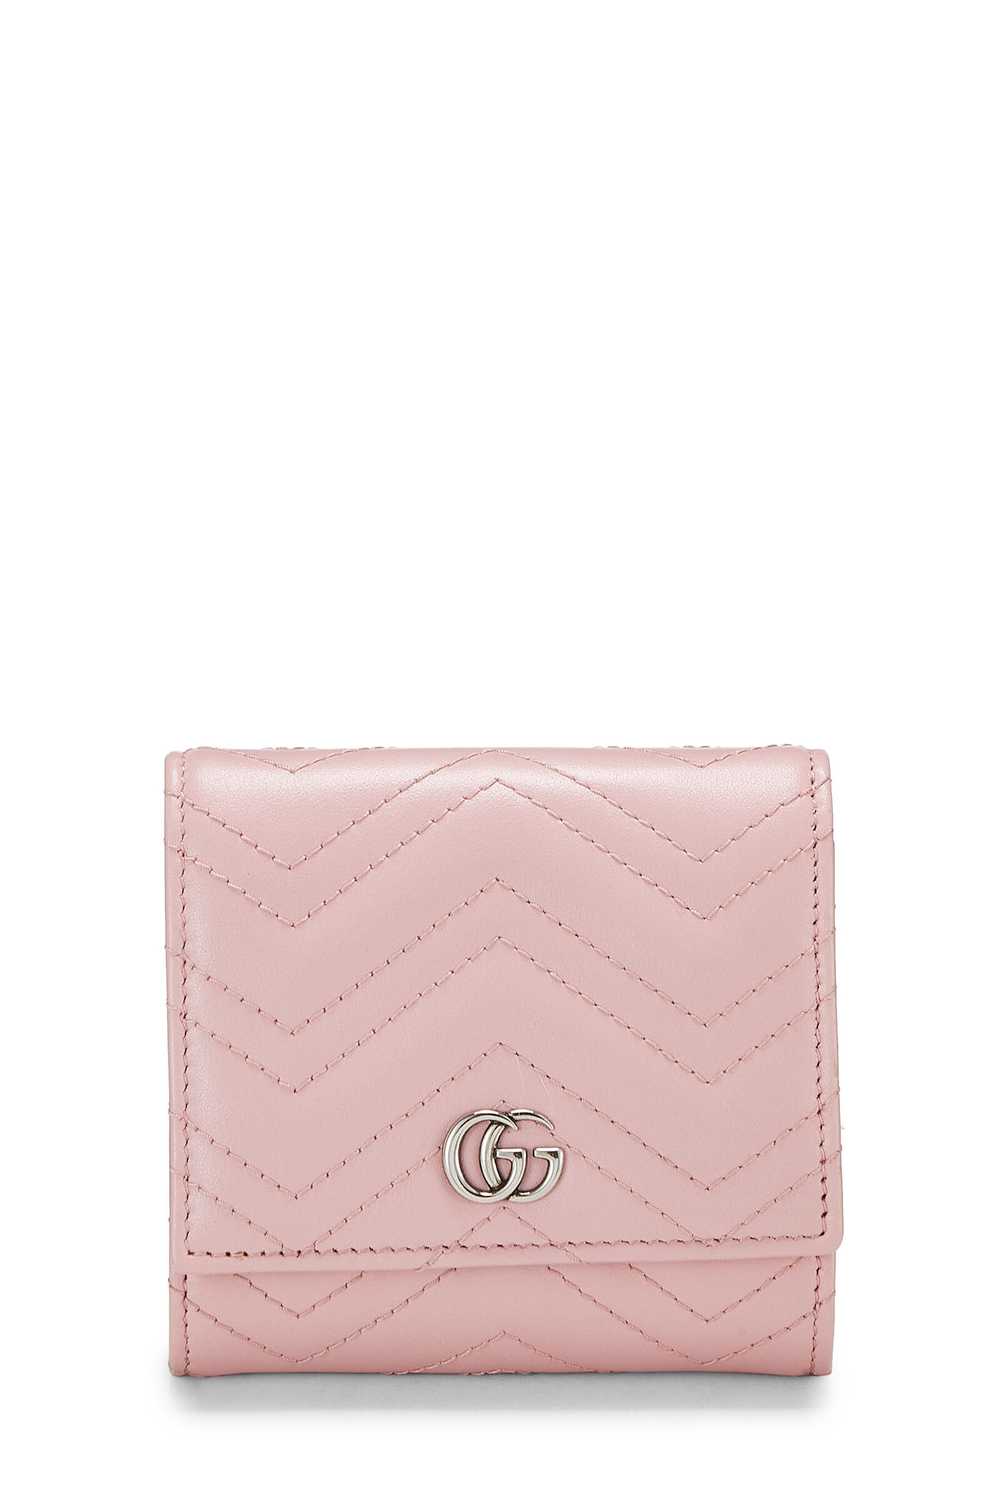 Pink Leather GG Marmont Card Case - image 1